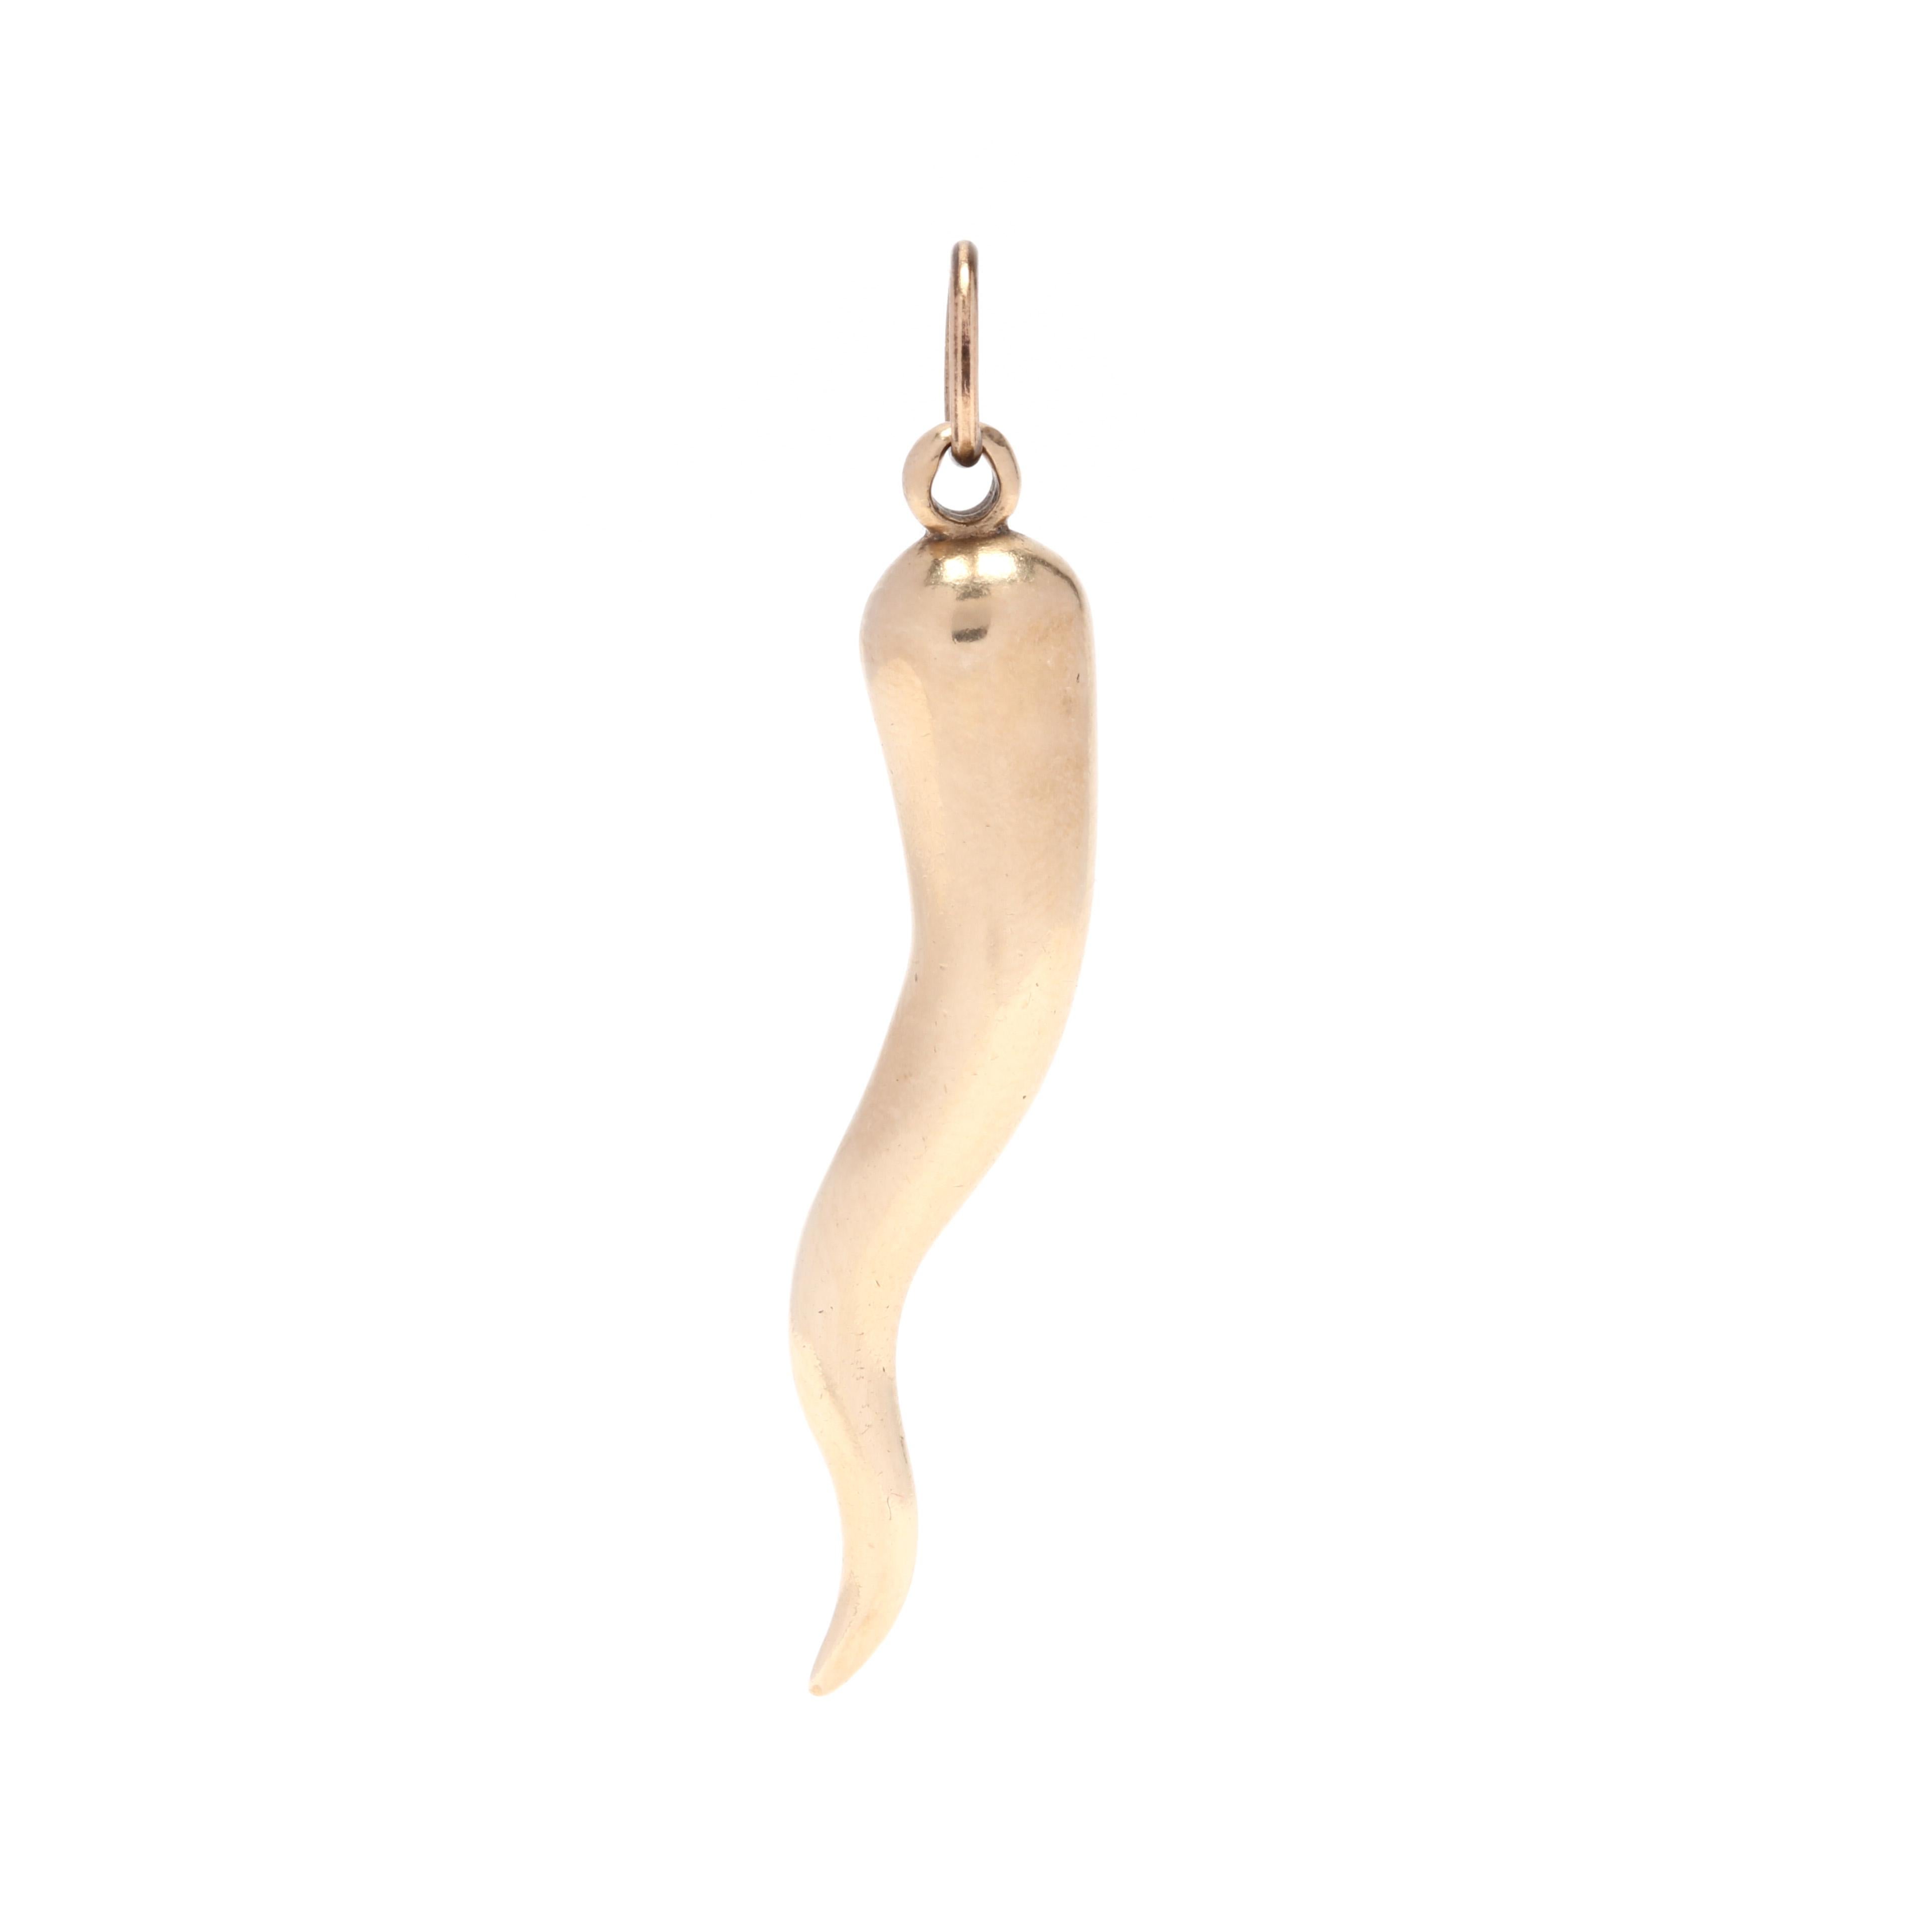 A 1970's 14 karat yellow gold Italian horn solid charm / pendant. This solid gold pendant features a curved horn design with a thin bail.

Length: 1.75 in.

4.95 dwts.

* Please note that this is a vintage item and may show signs of wear. It has